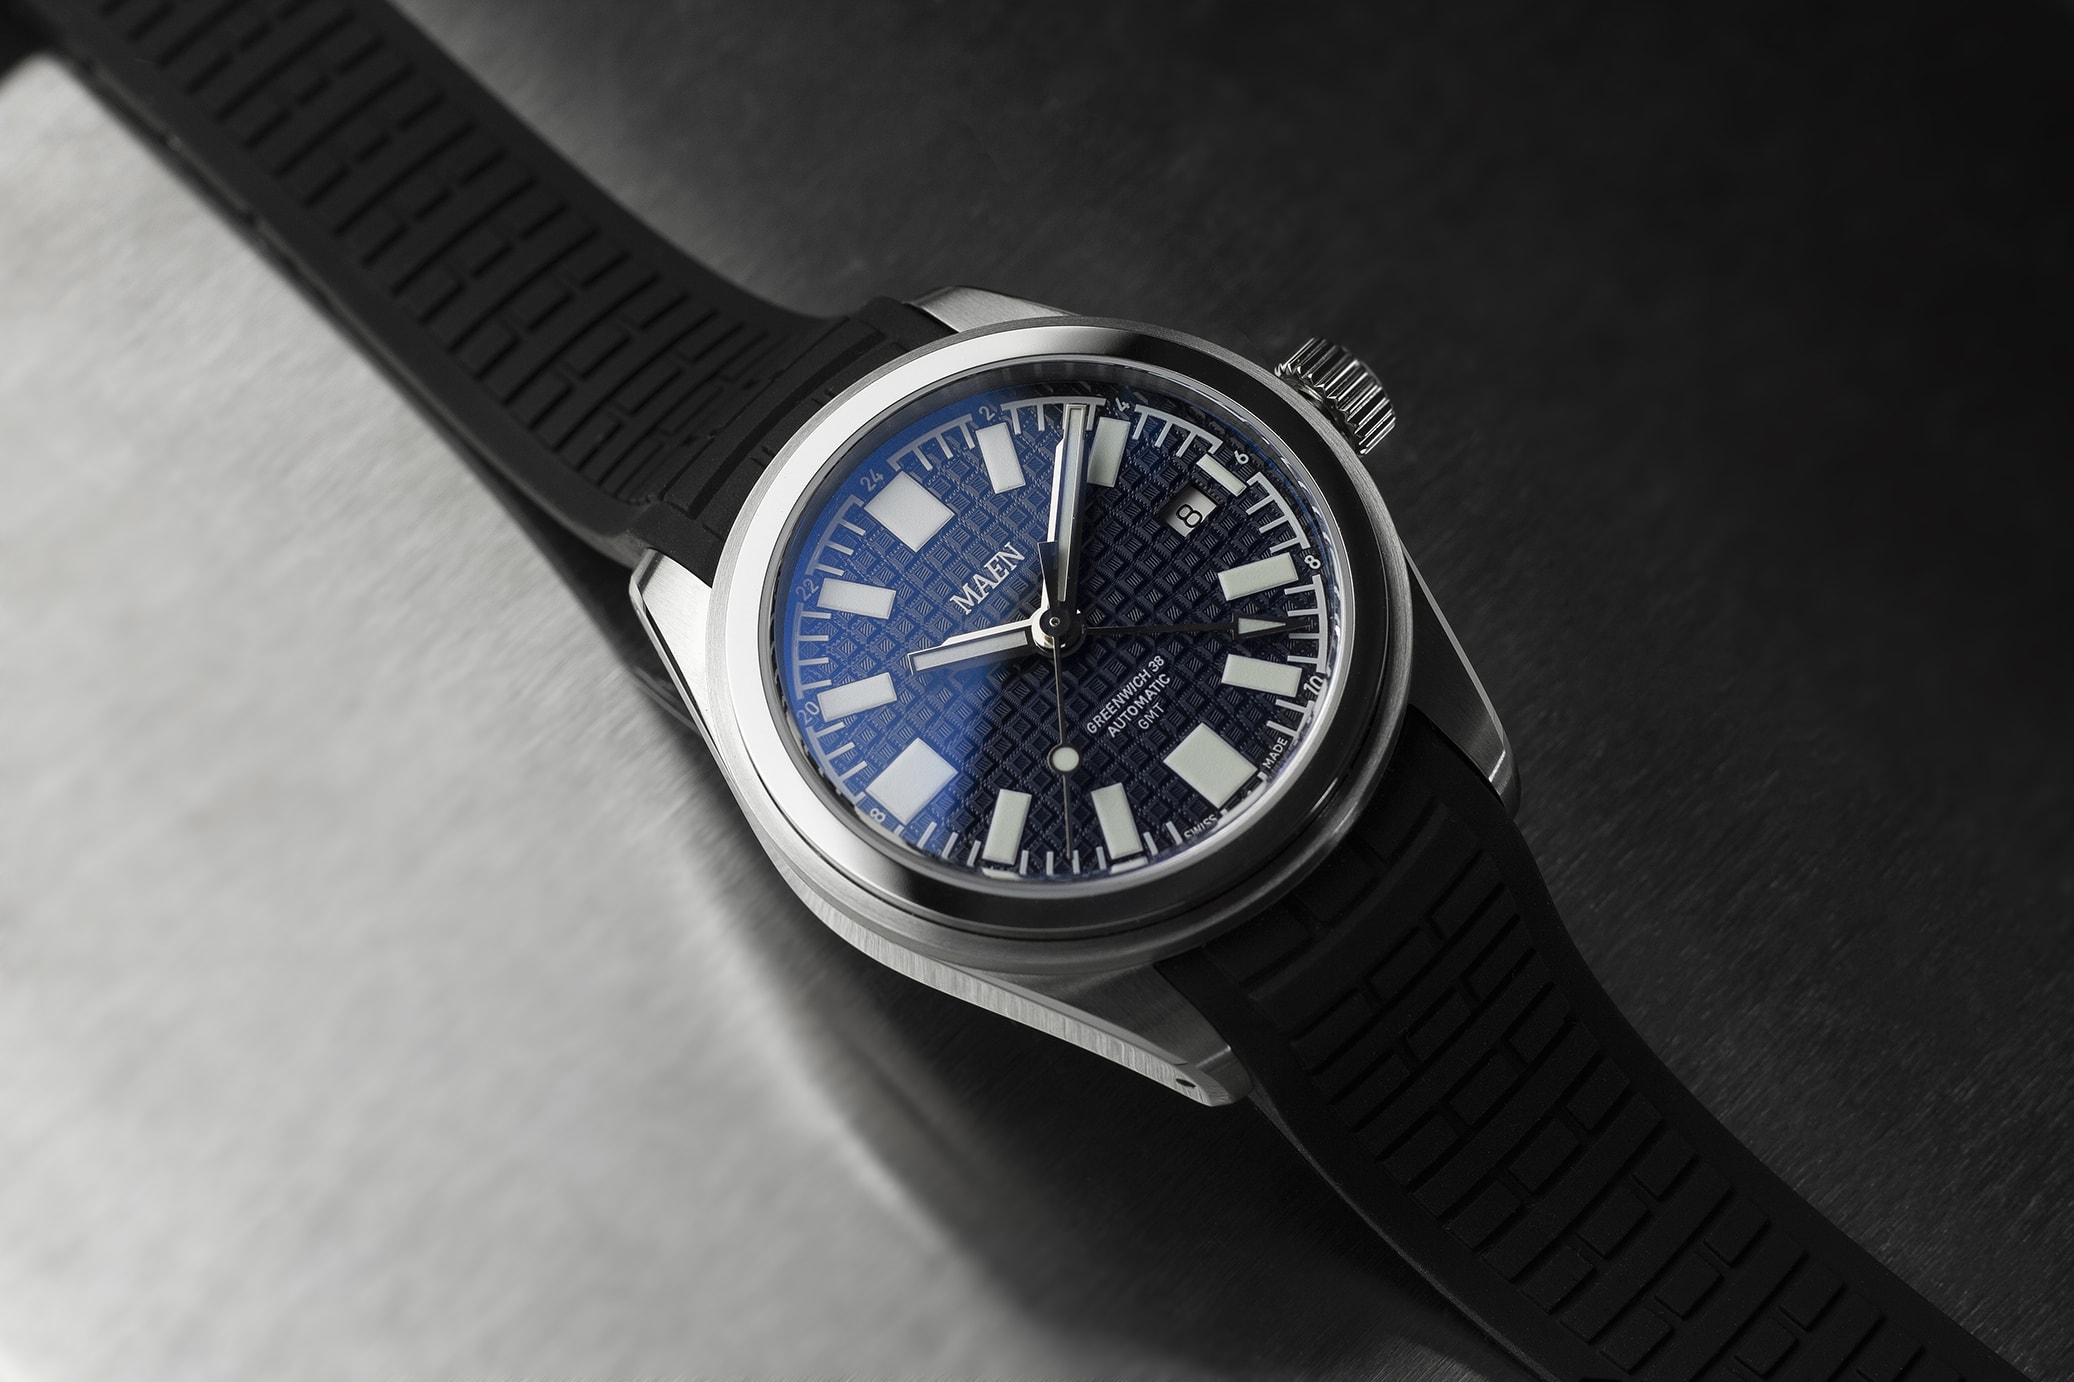 Introducing The MAEN Greenwich Automatic 38 GMT - Worn & Wound